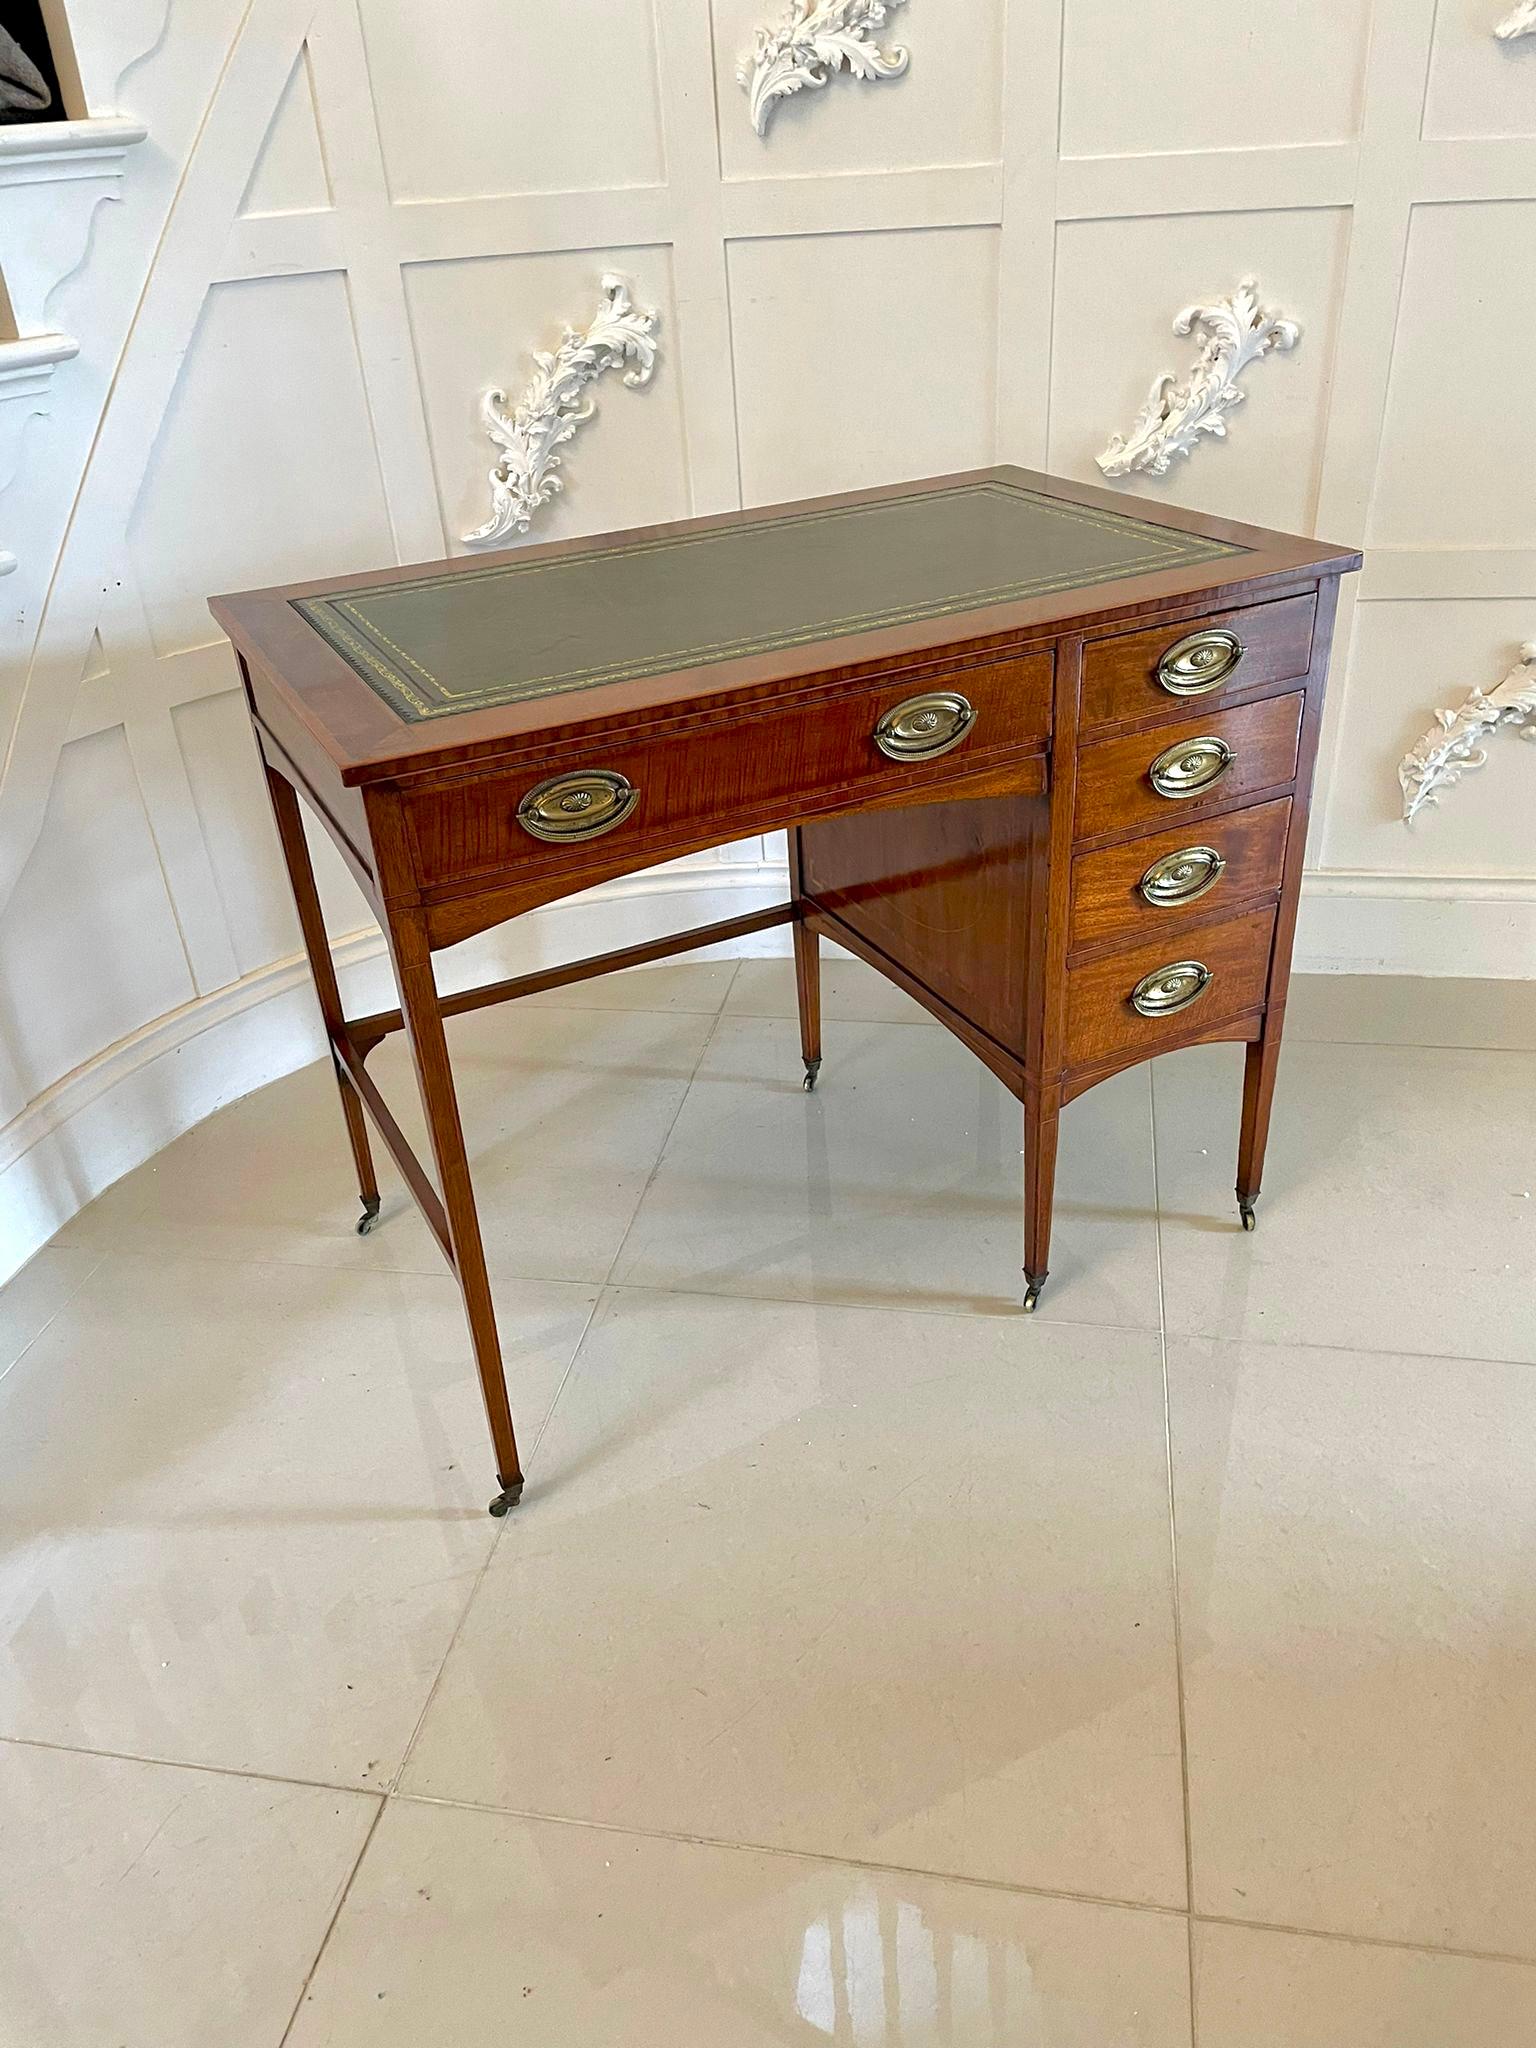 Antique Edwardian Quality Freestanding Mahogany Inlaid Pedestal Desk In Excellent Condition For Sale In Suffolk, GB